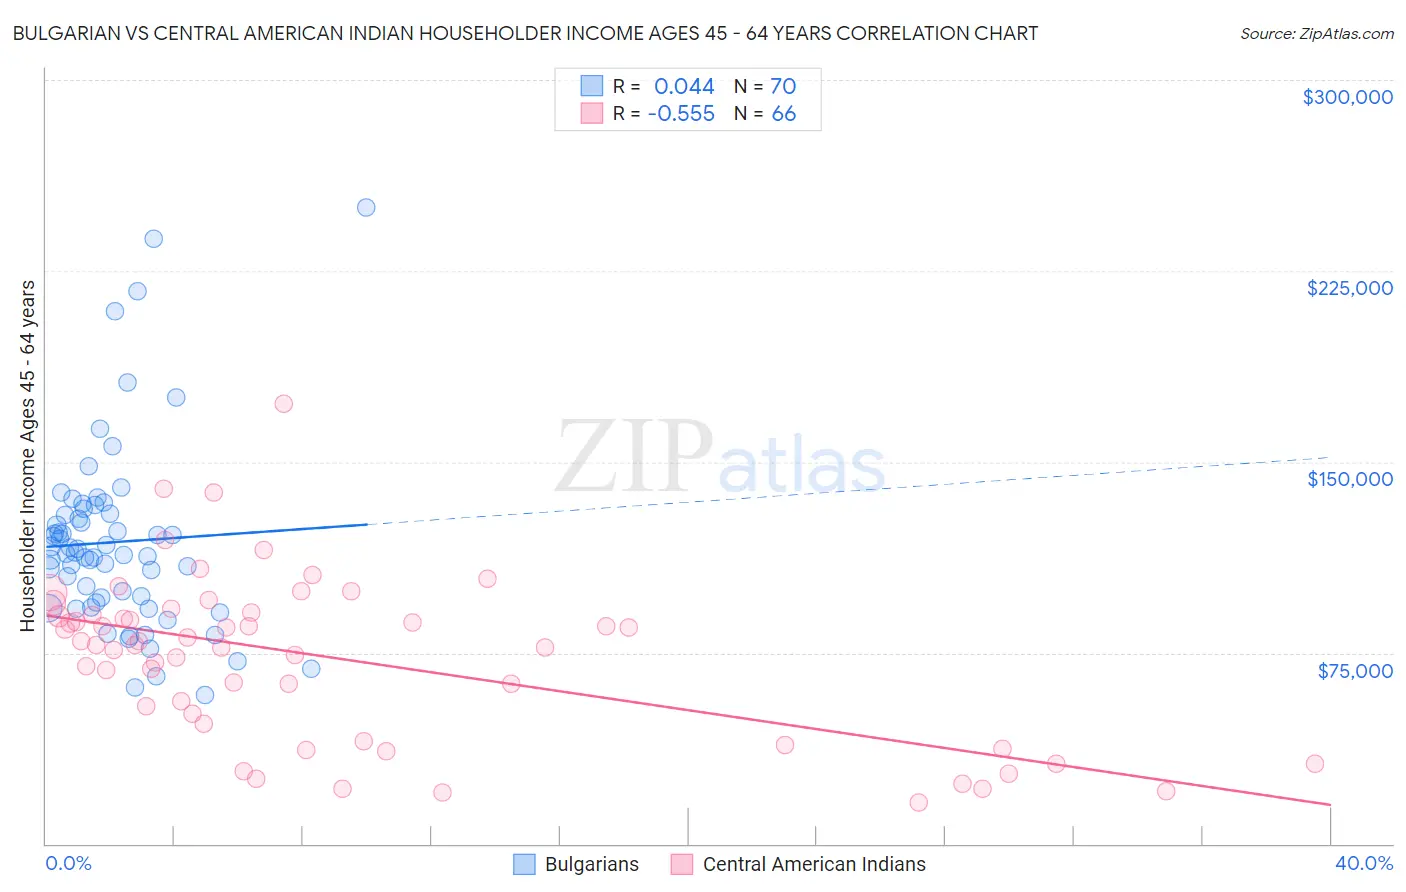 Bulgarian vs Central American Indian Householder Income Ages 45 - 64 years